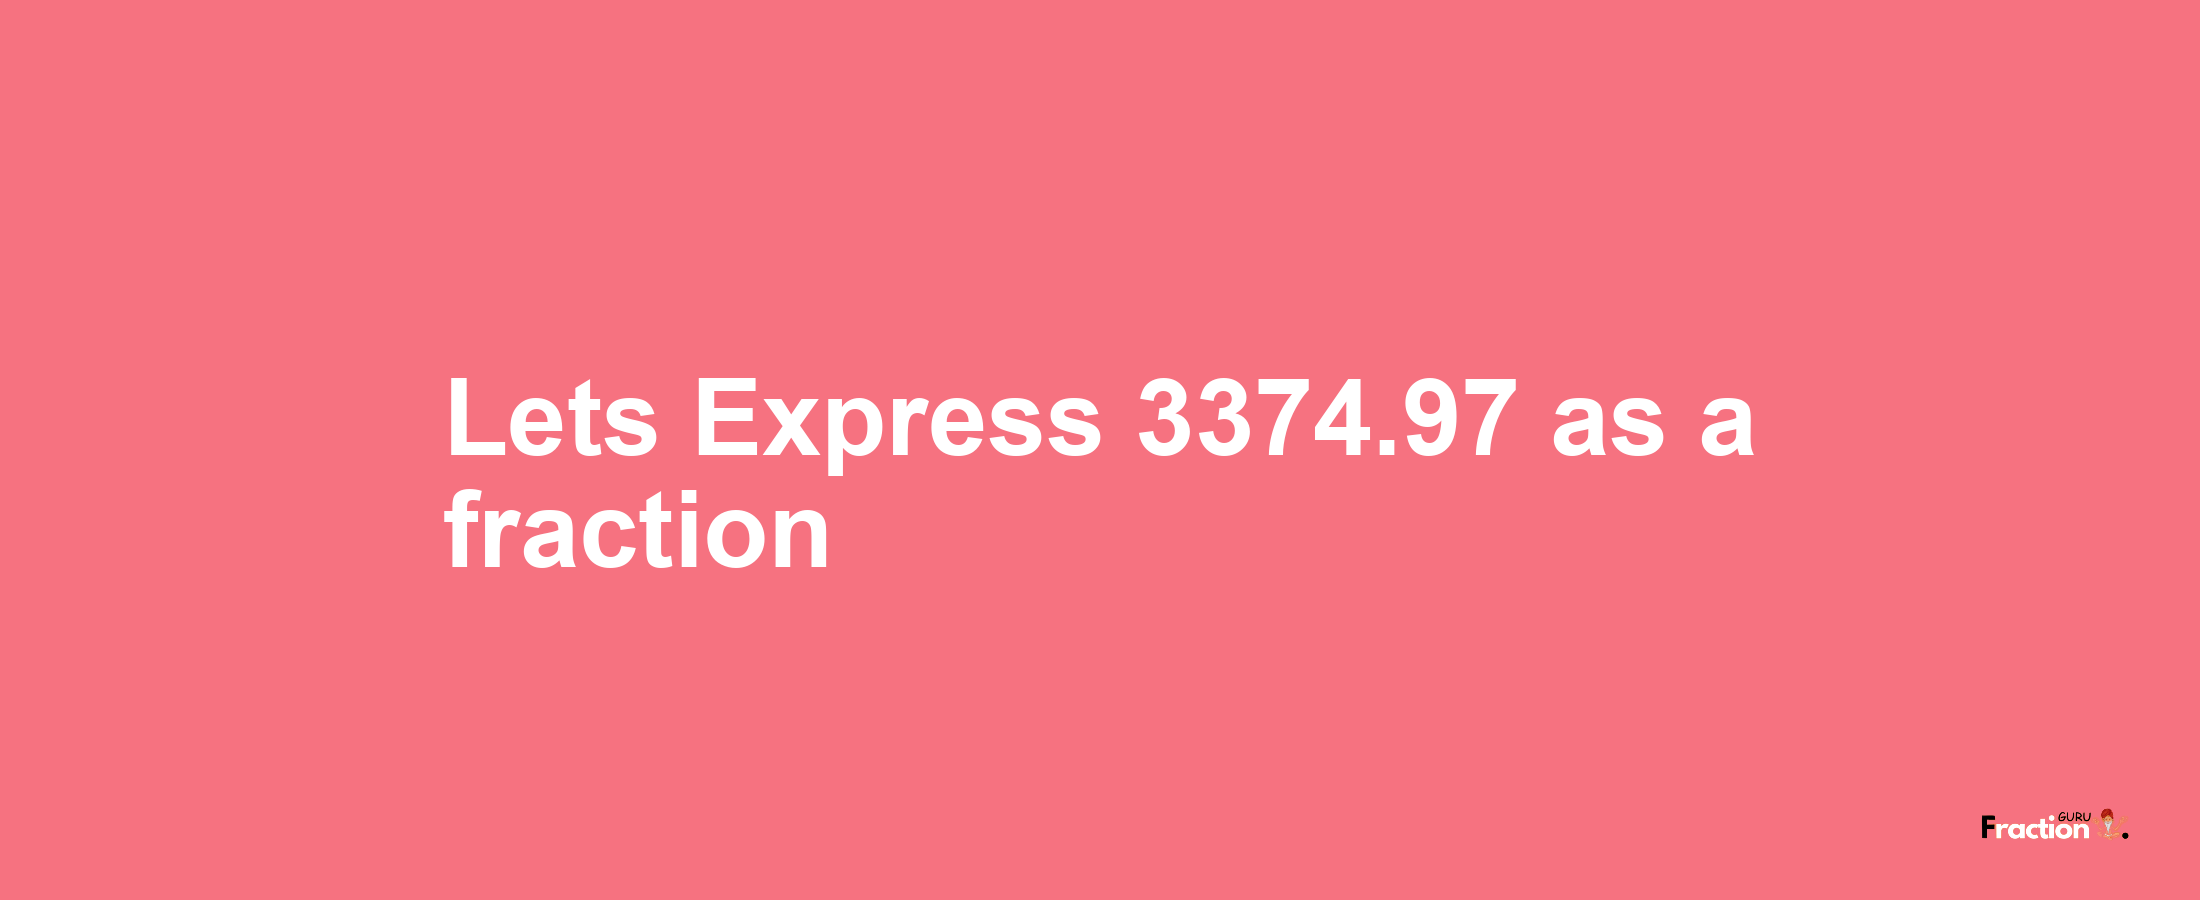 Lets Express 3374.97 as afraction